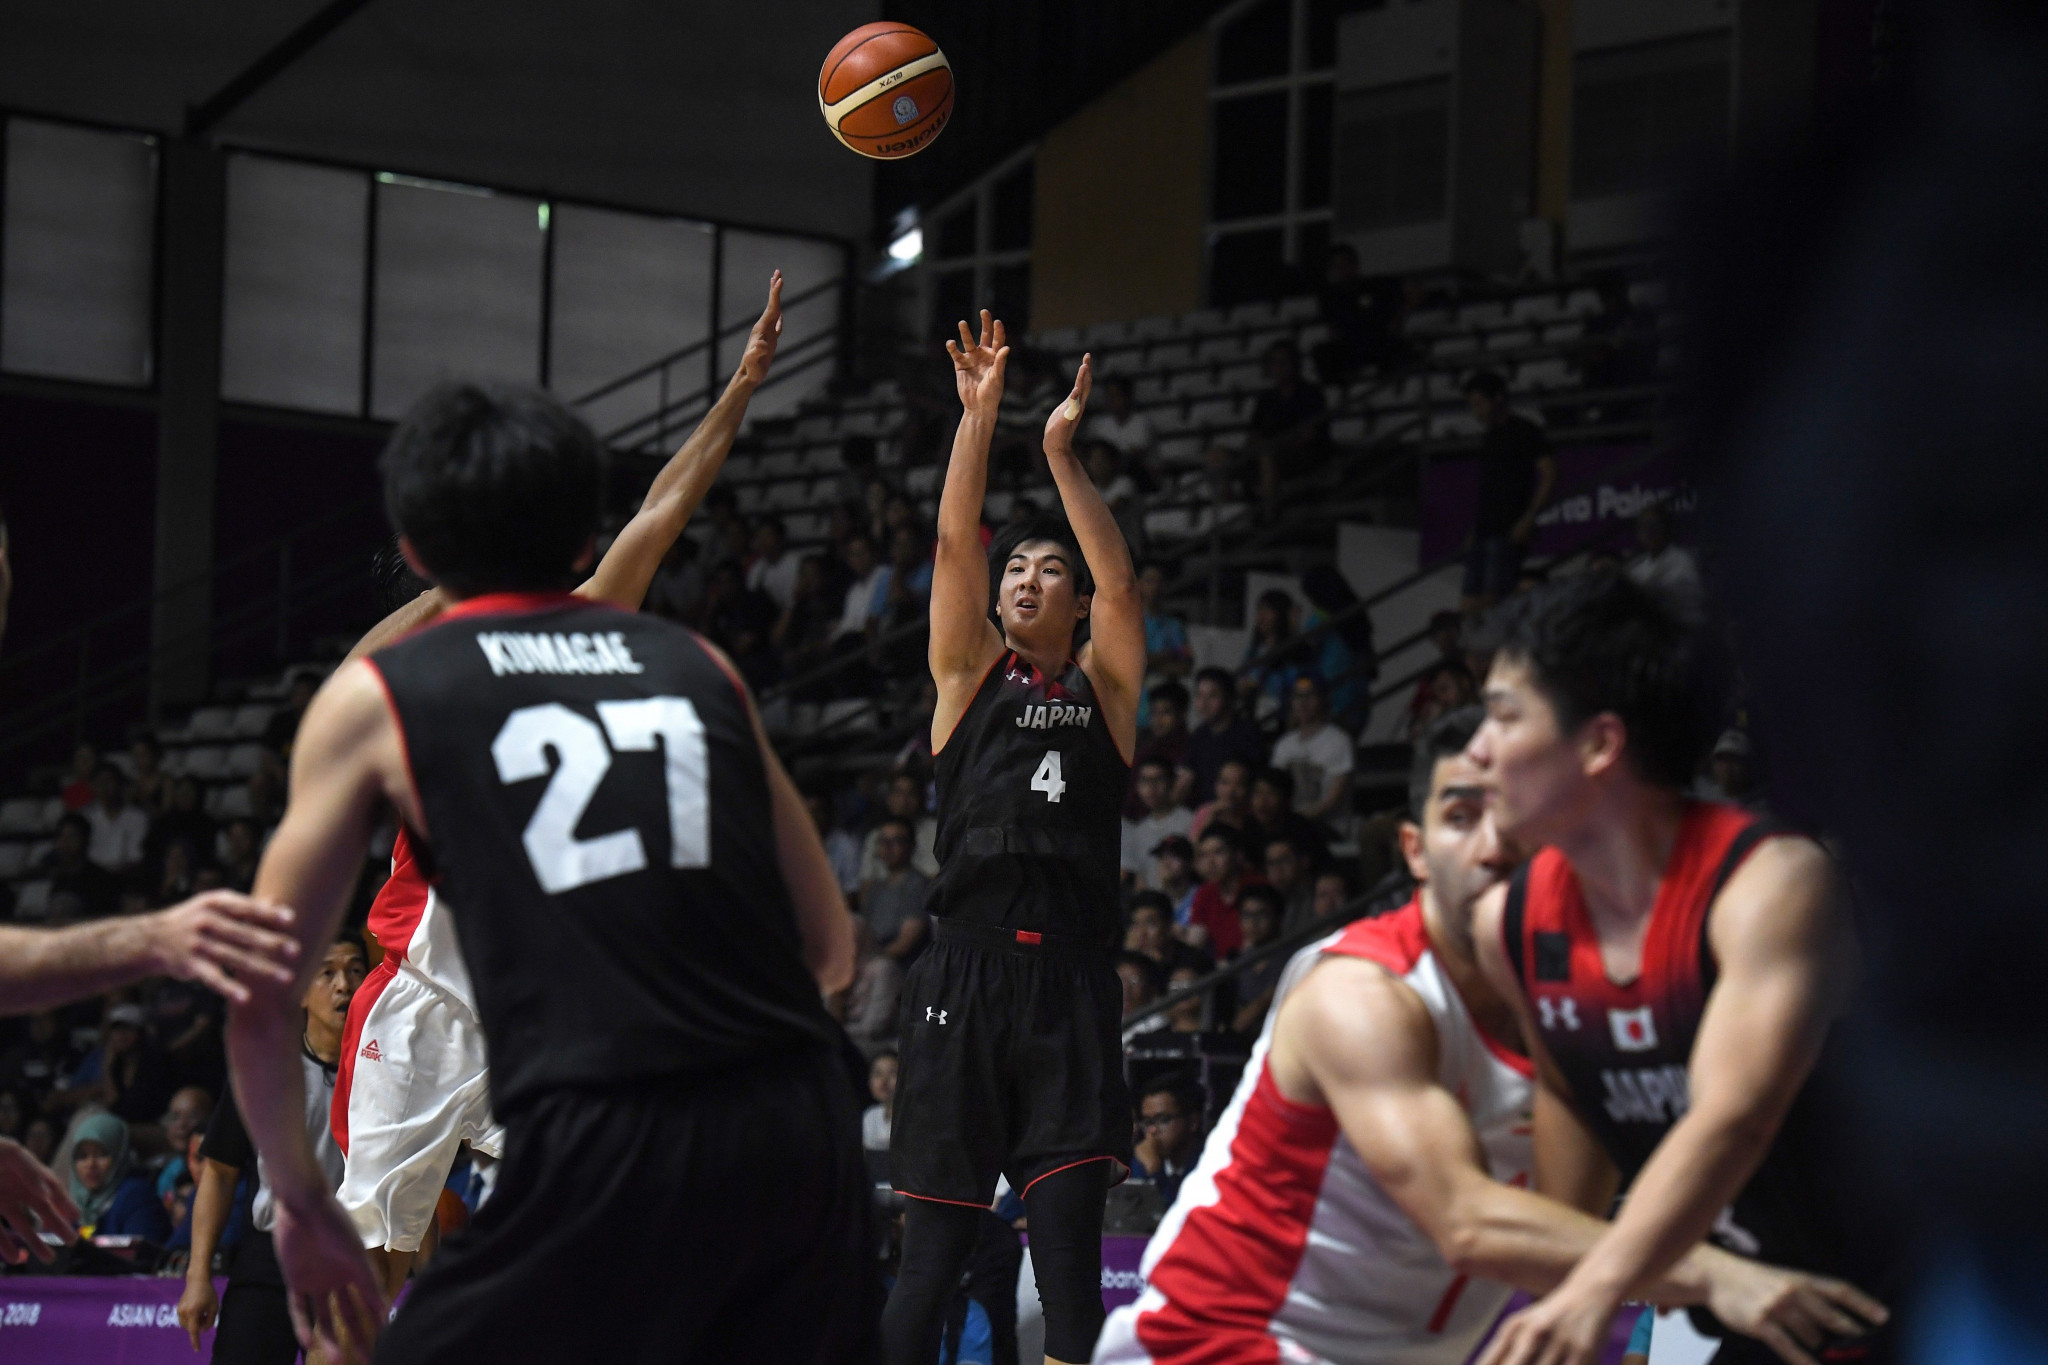 Japan on track to gain Olympic spot for men's basketball team at Tokyo 2020